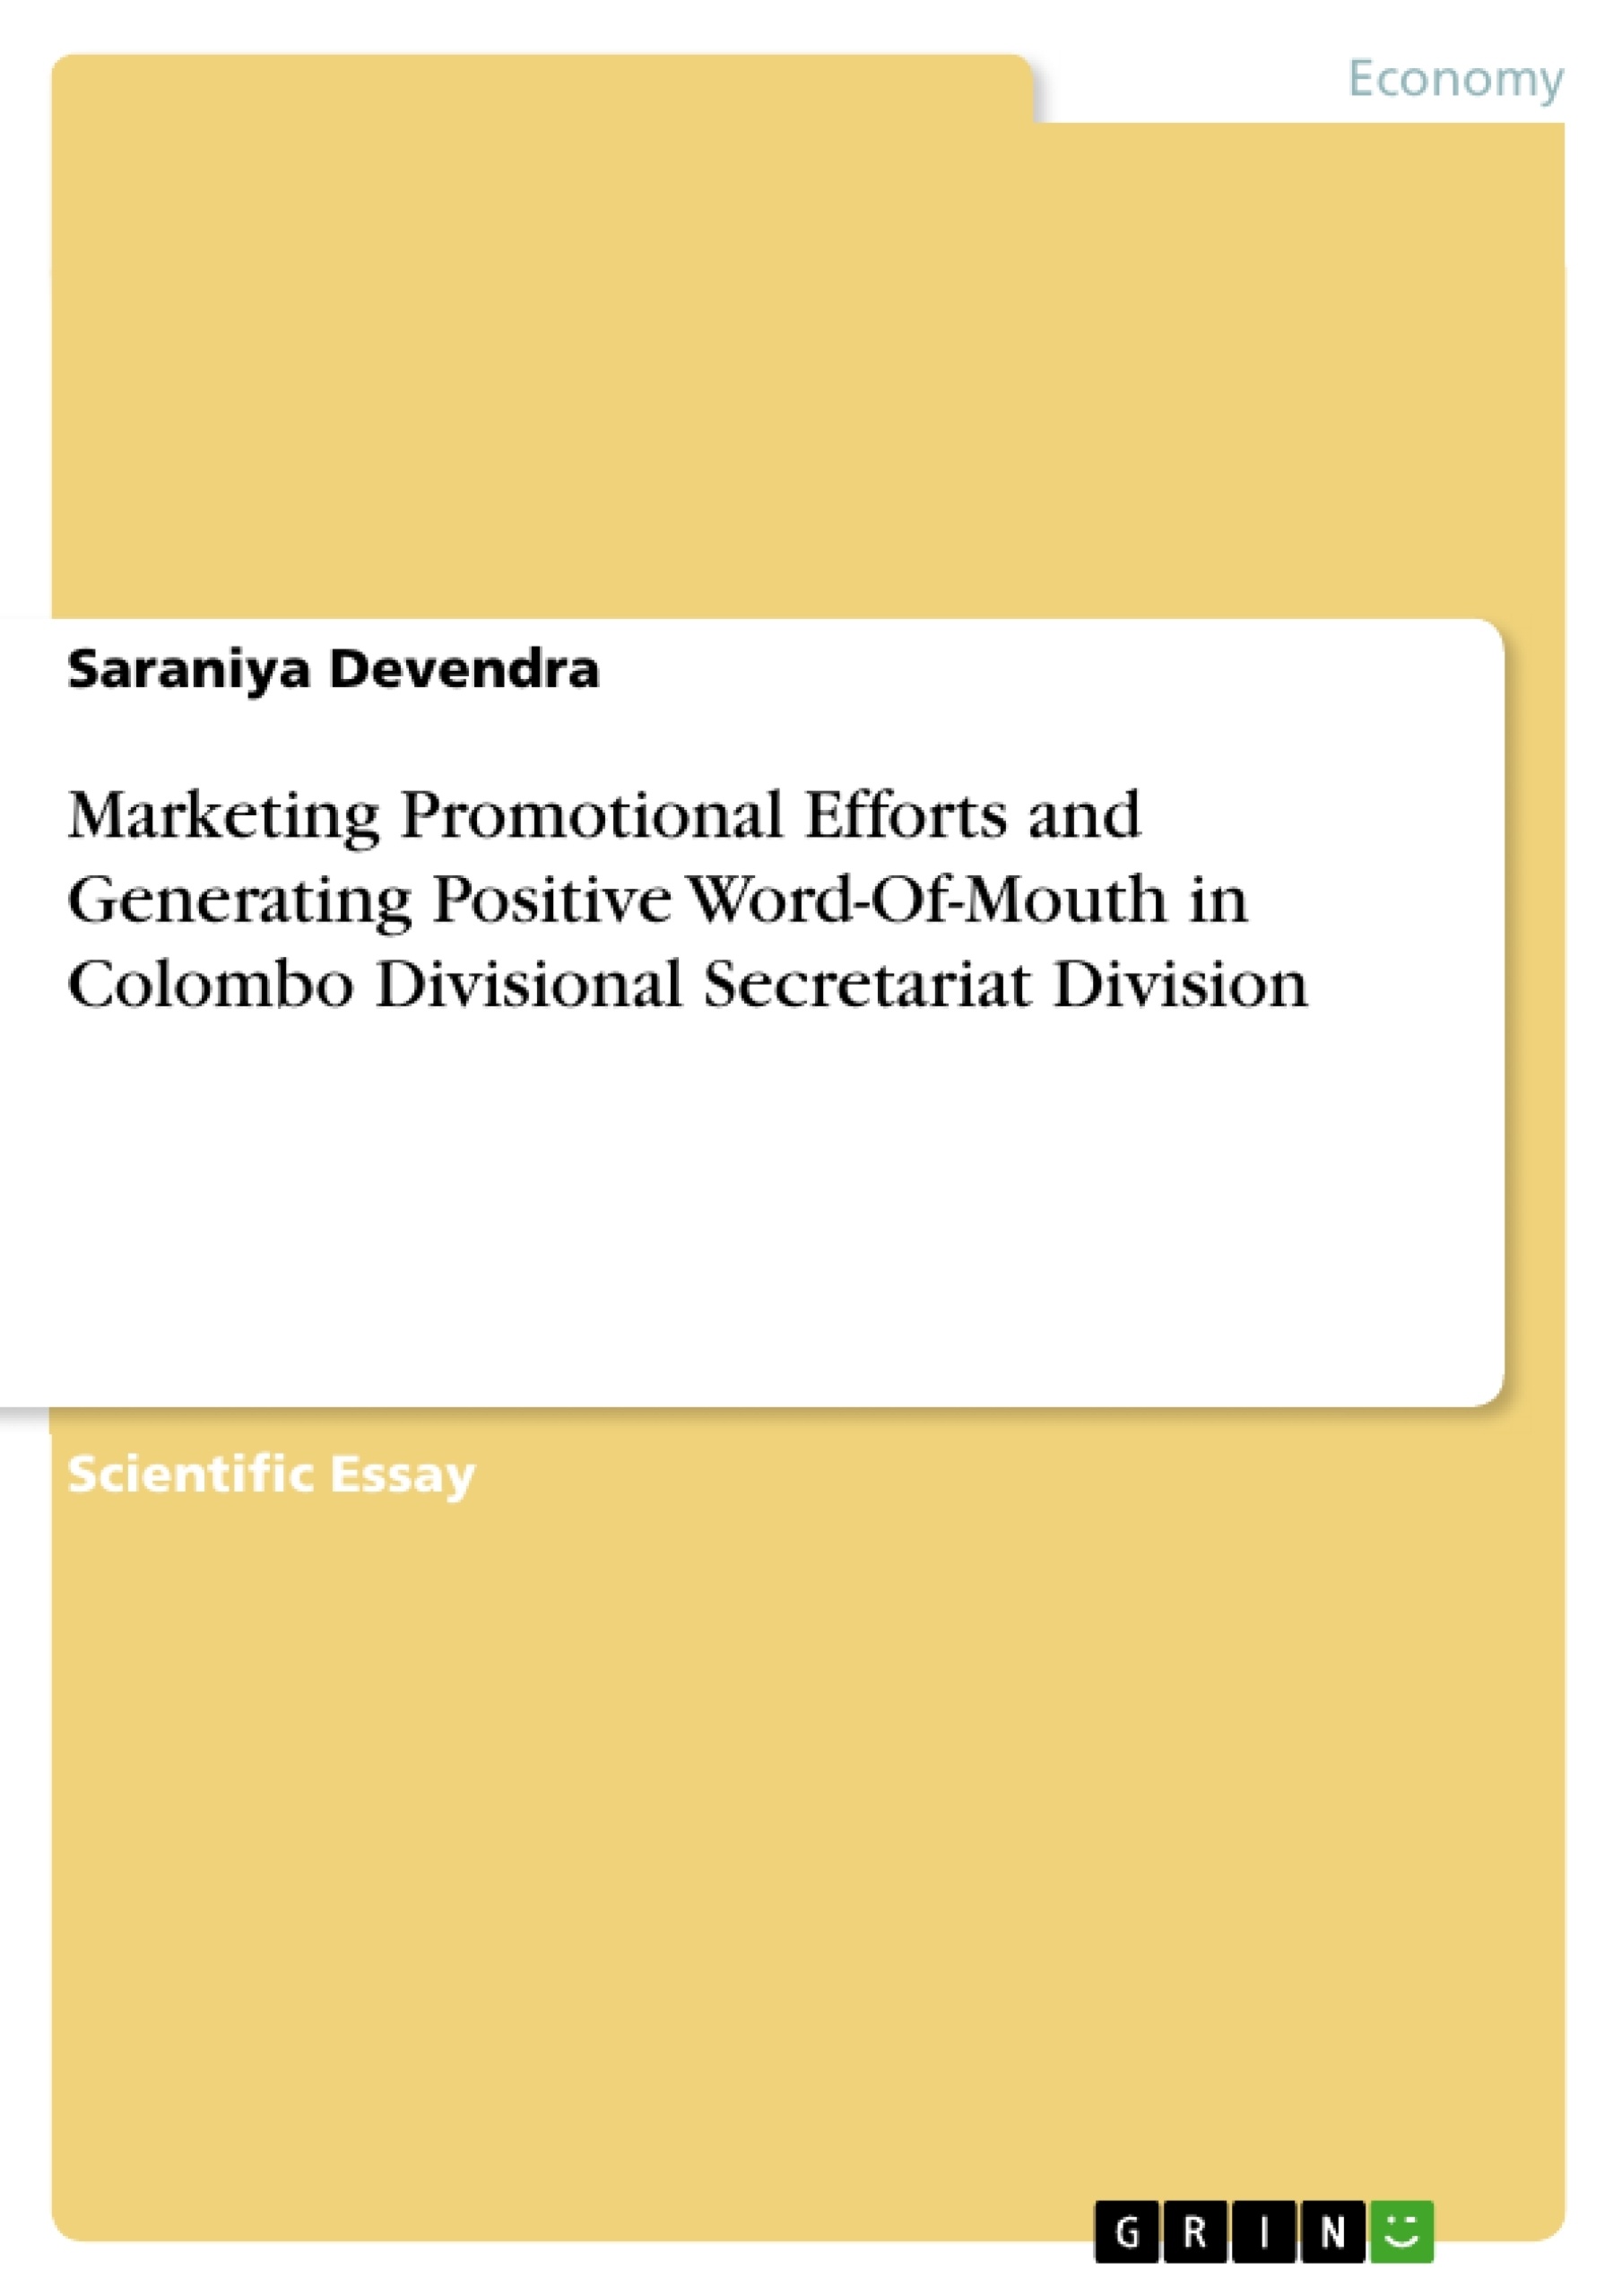 Title: Marketing Promotional Efforts and Generating Positive Word-Of-Mouth in Colombo Divisional Secretariat Division